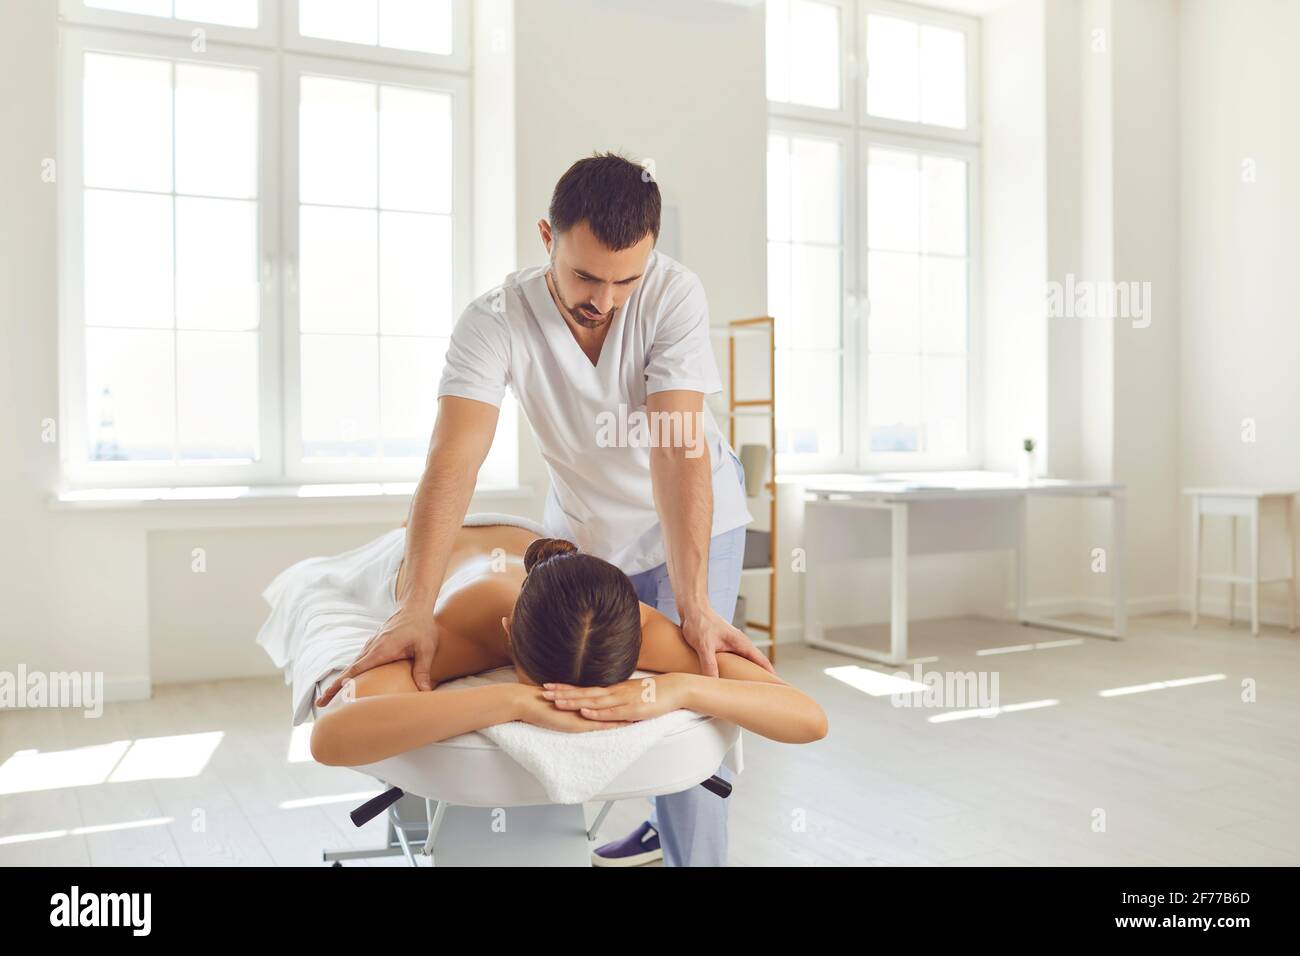 Masseur or manual therapist doing relaxing body massage for young woman lying on massage table Stock Photo